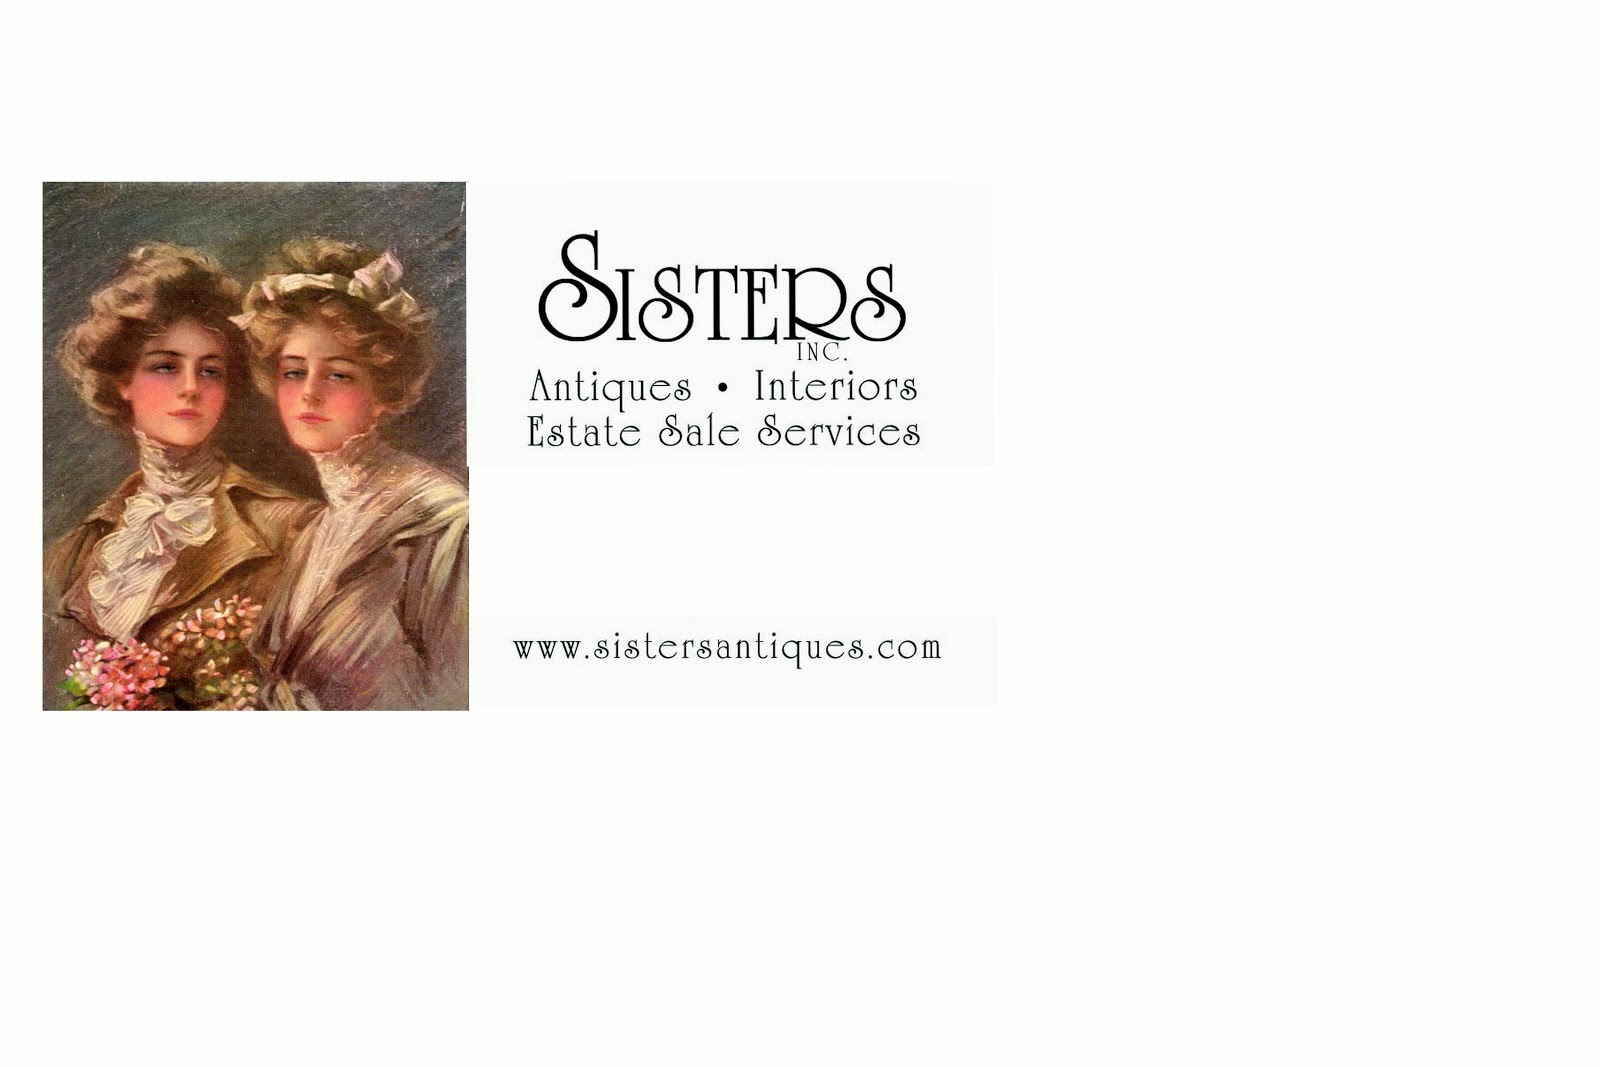 SISTERS ANTIQUES